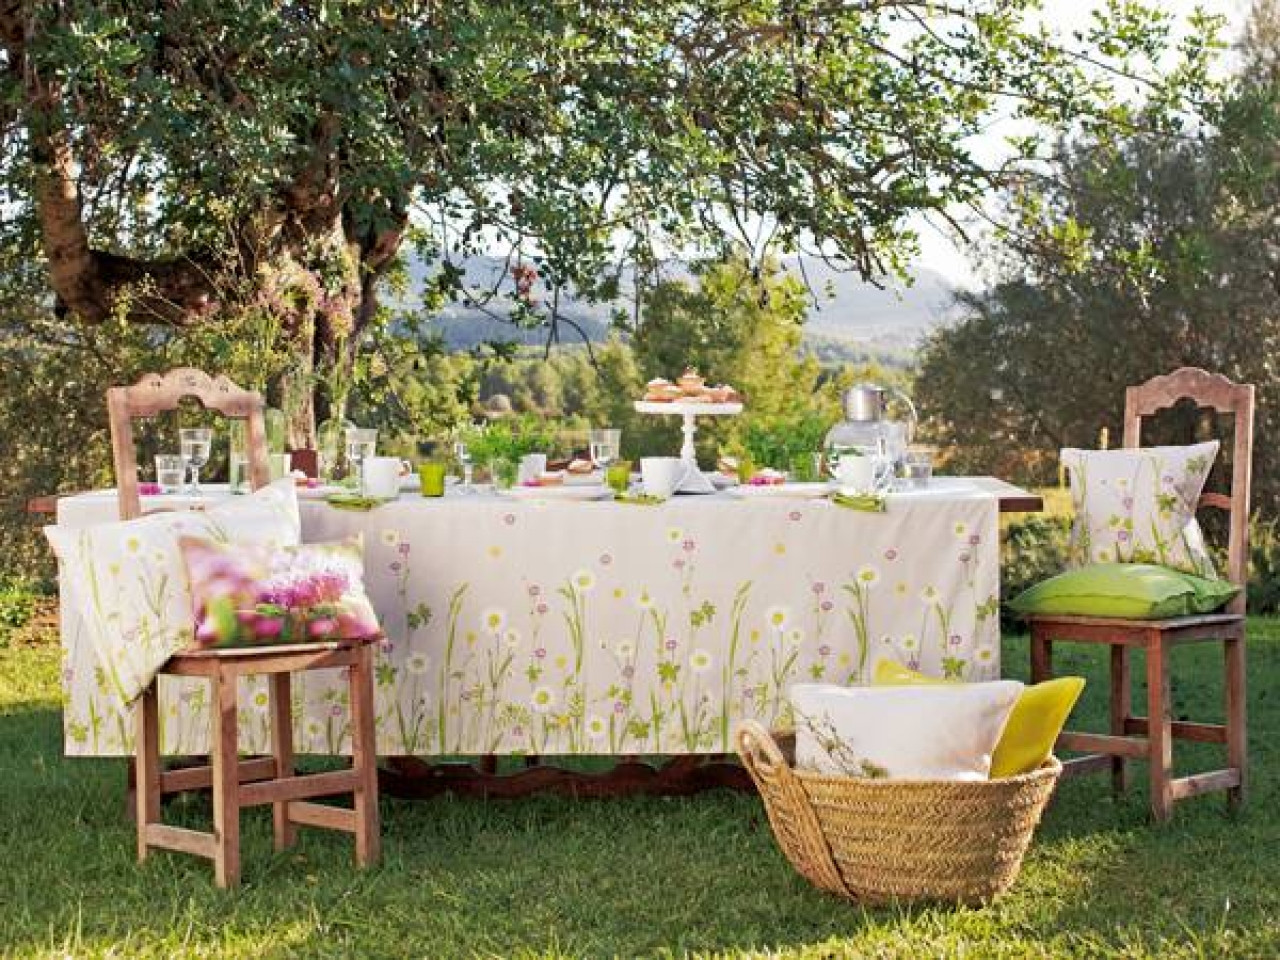 Used Rustic Wedding Decorations For Sale
 Used dining room tables for sale outdoor picnic